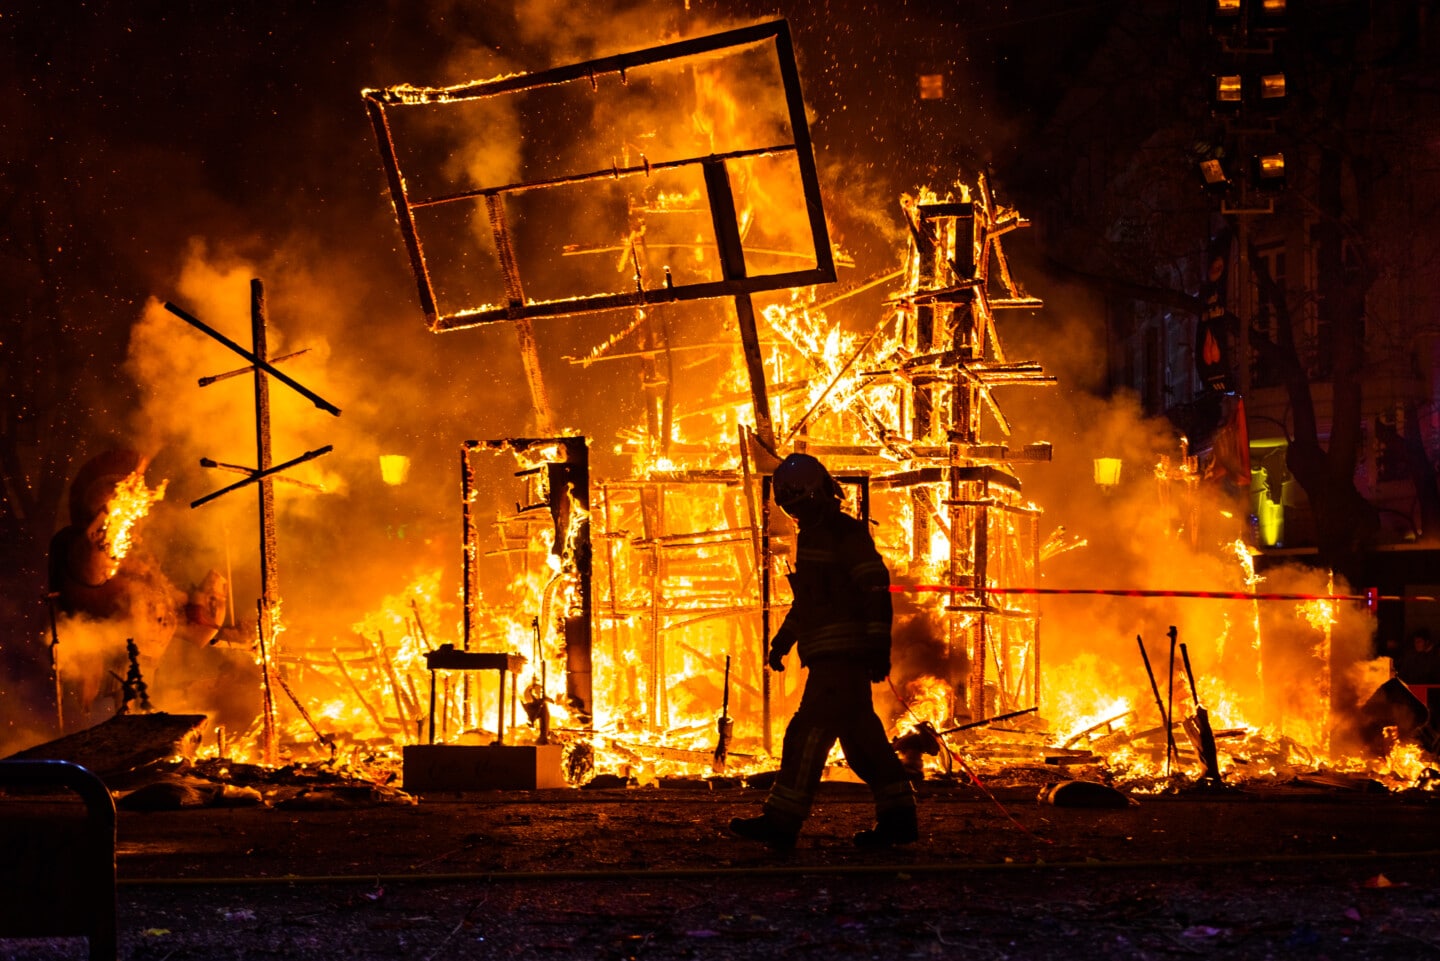 Firefighter with his protective suit working controlling the burning of a Falla during the Valencian fiestas.